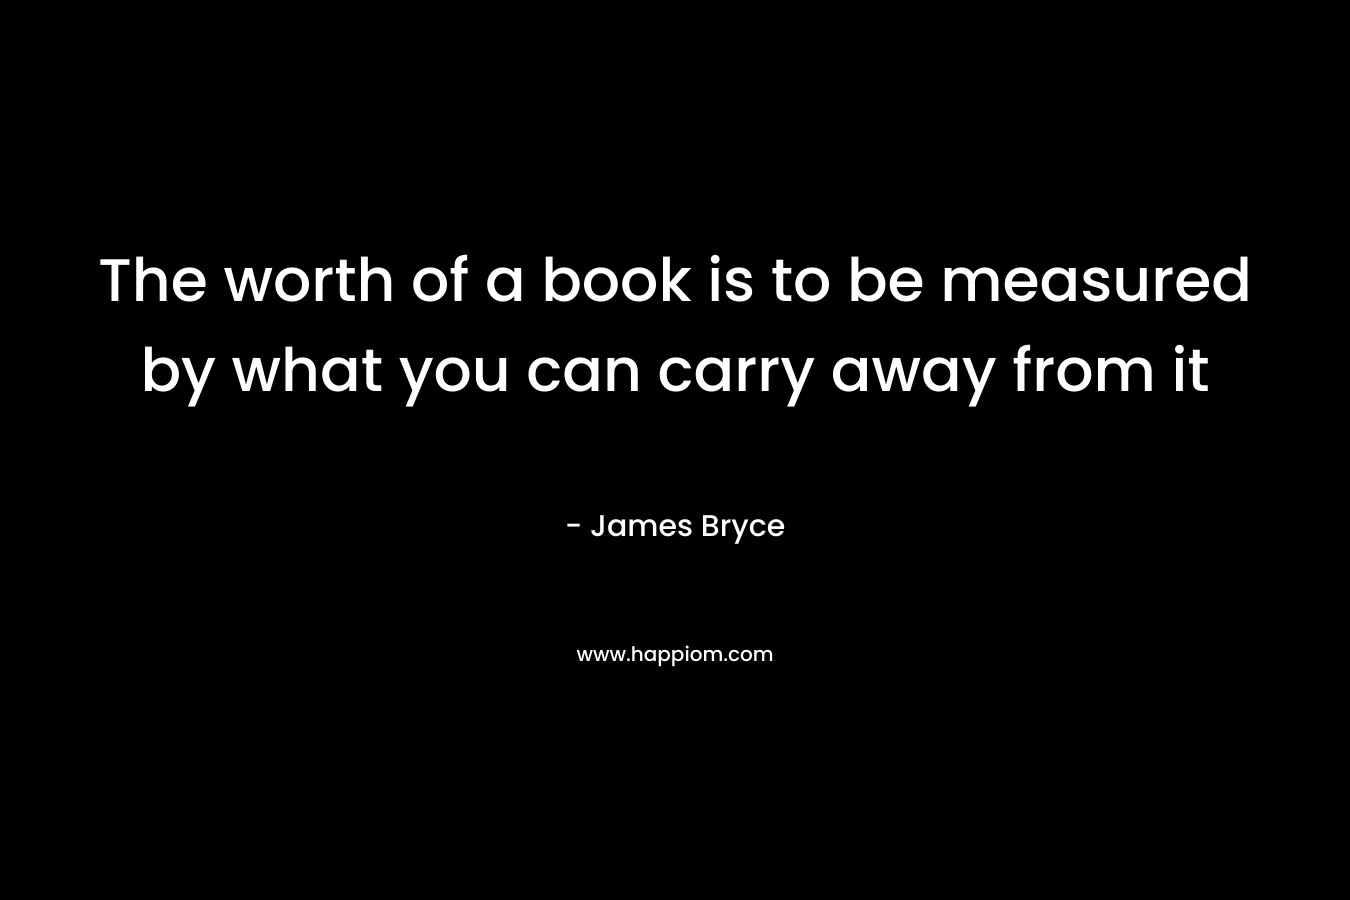 The worth of a book is to be measured by what you can carry away from it